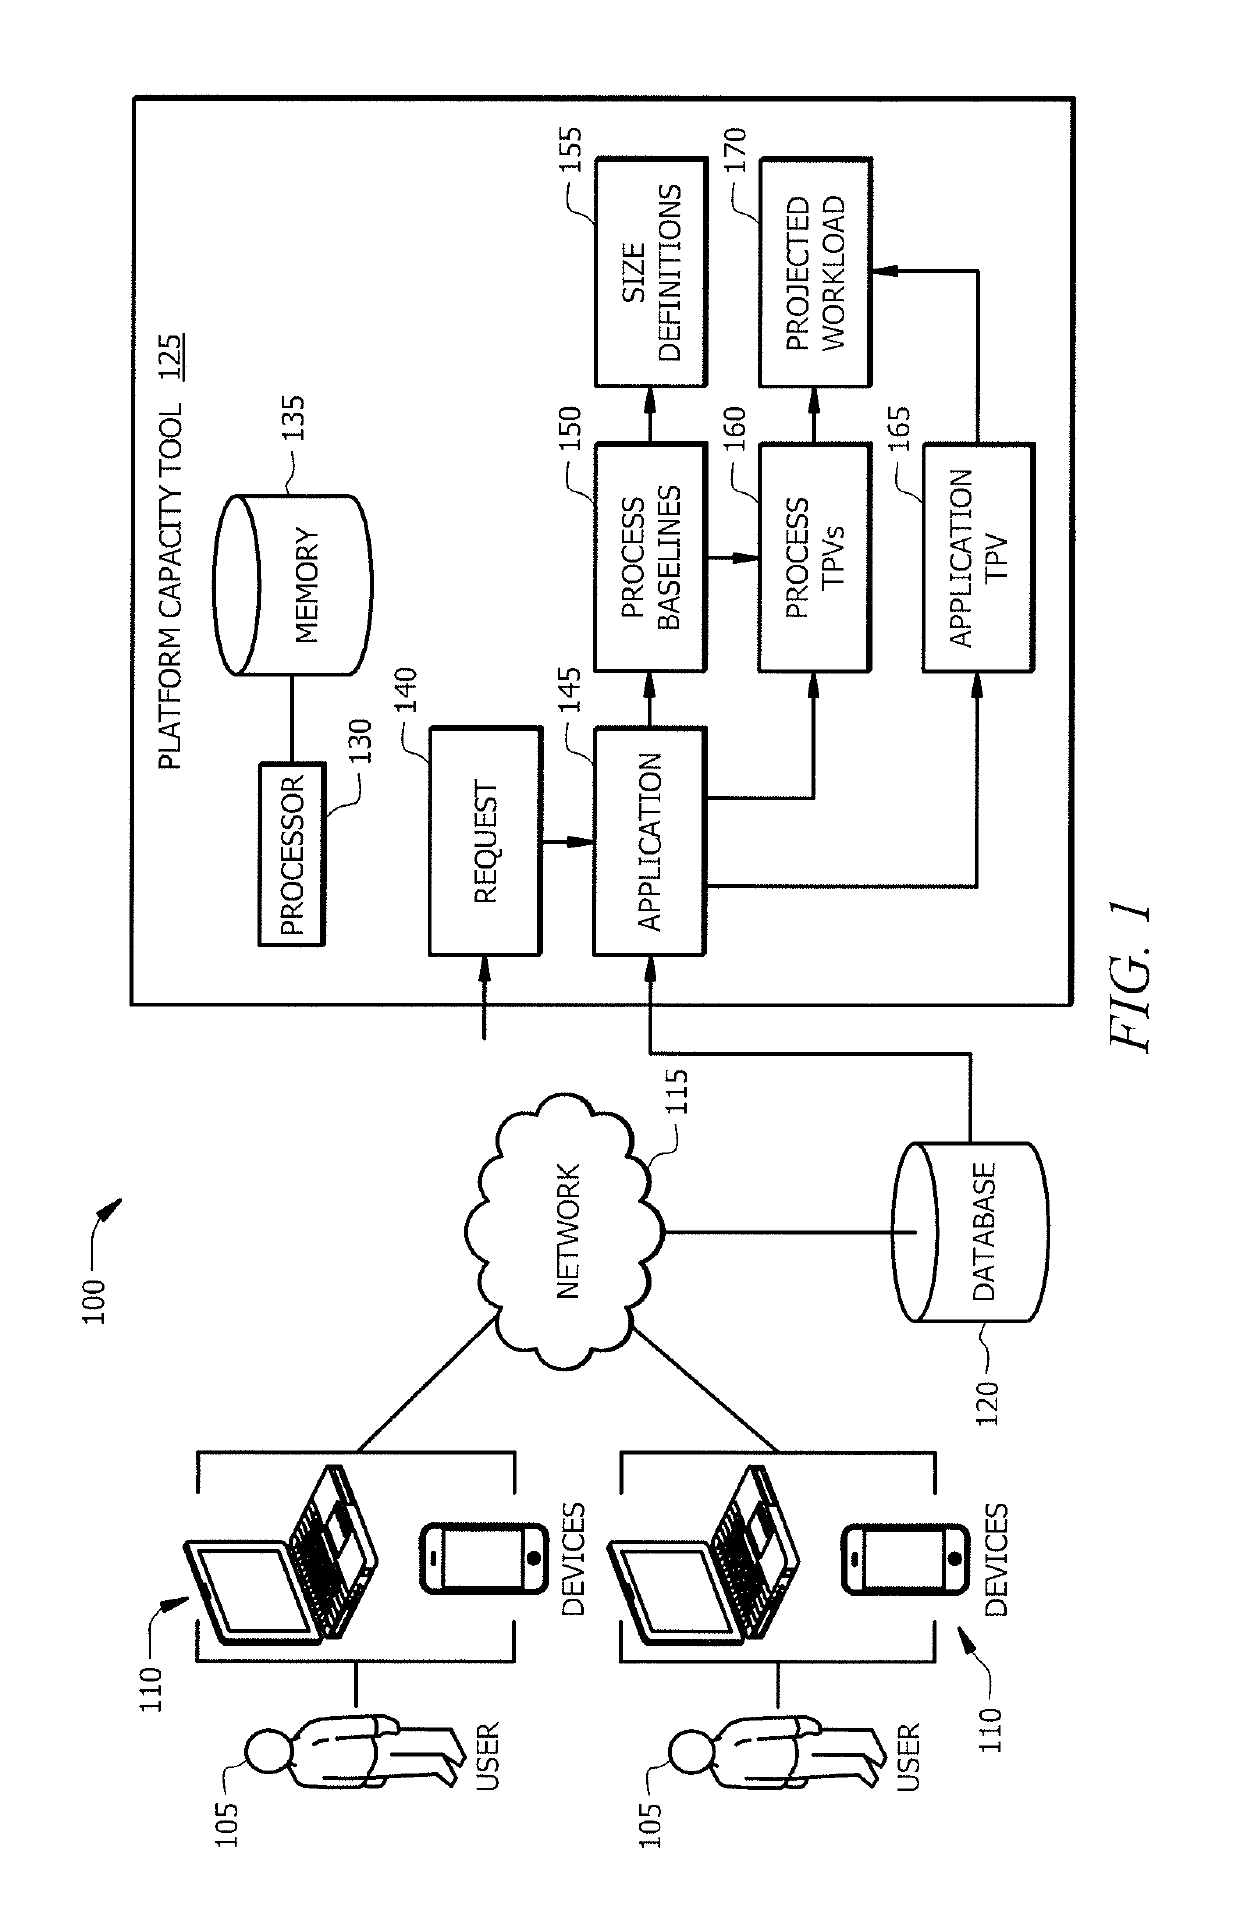 Platform capacity tool for determining whether an application can be executed